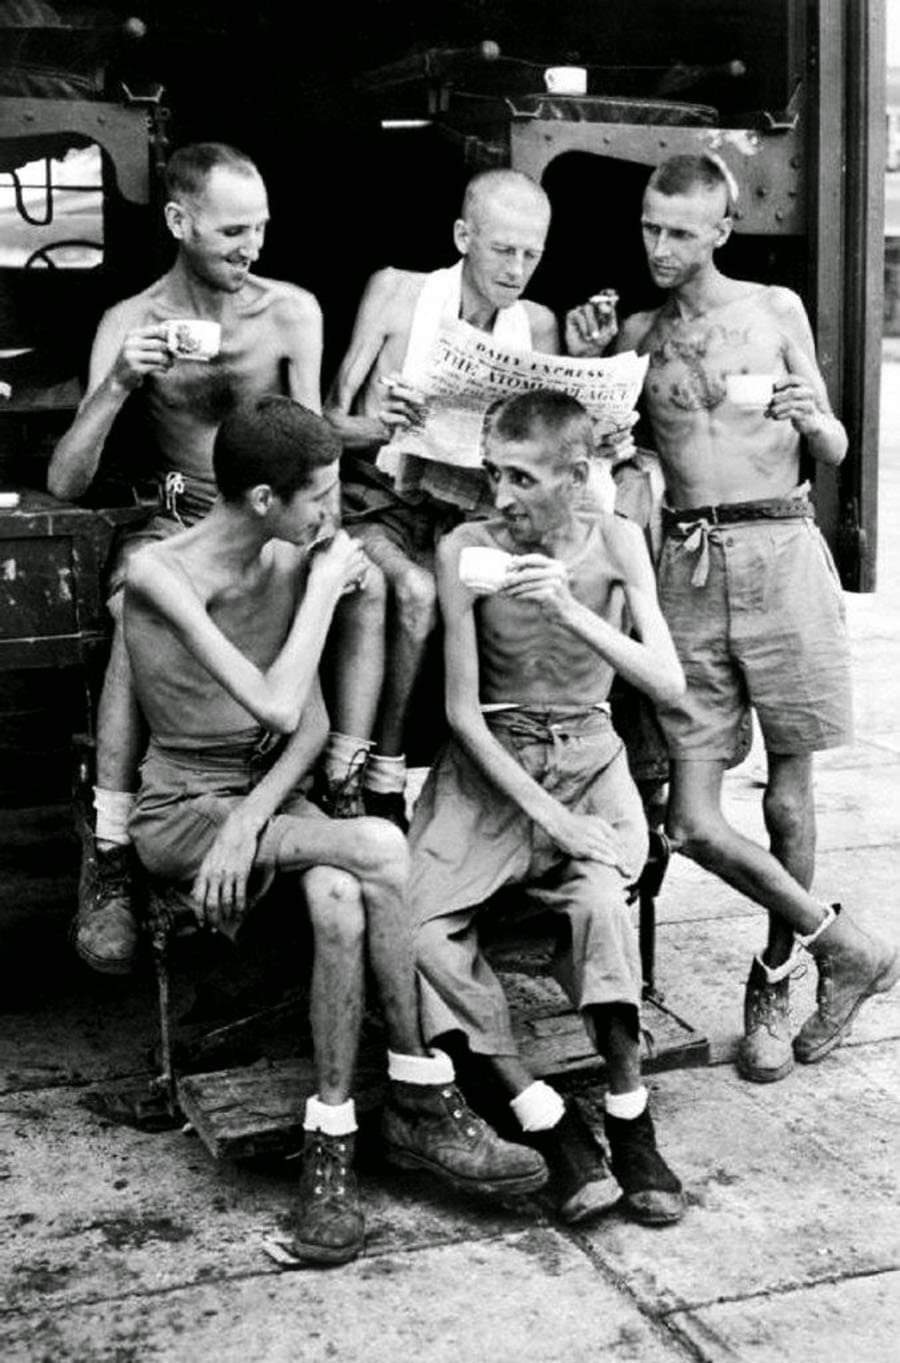 Australian prisoners of war enjoying a cup of coffee after their release from Japanese captivity at the end of World War II, 1945.